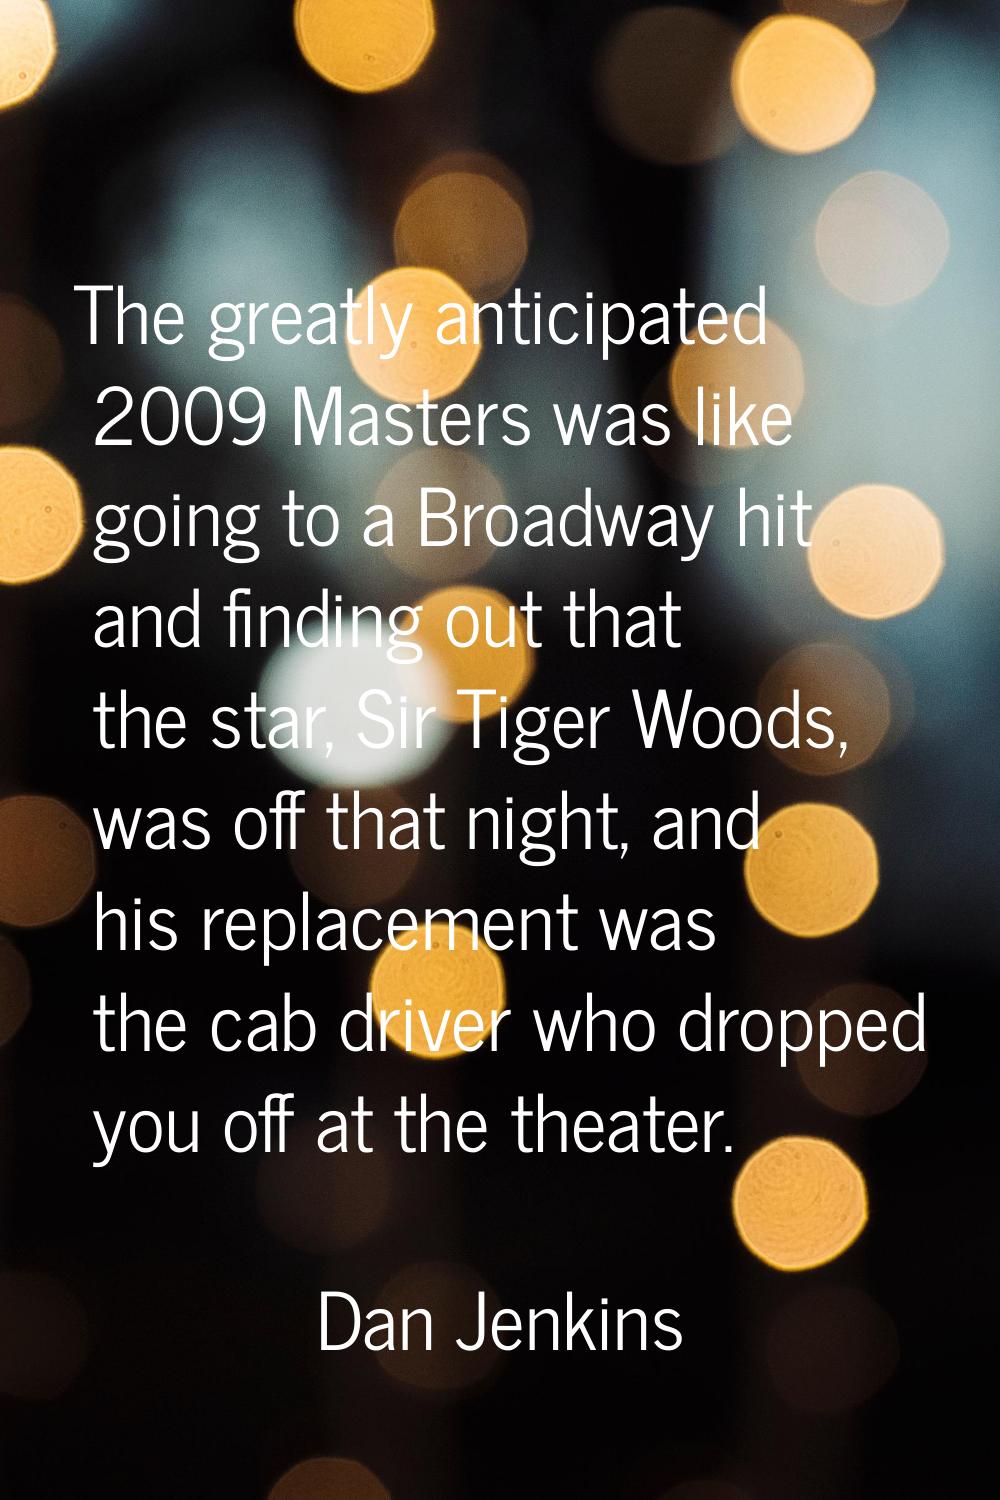 The greatly anticipated 2009 Masters was like going to a Broadway hit and finding out that the star